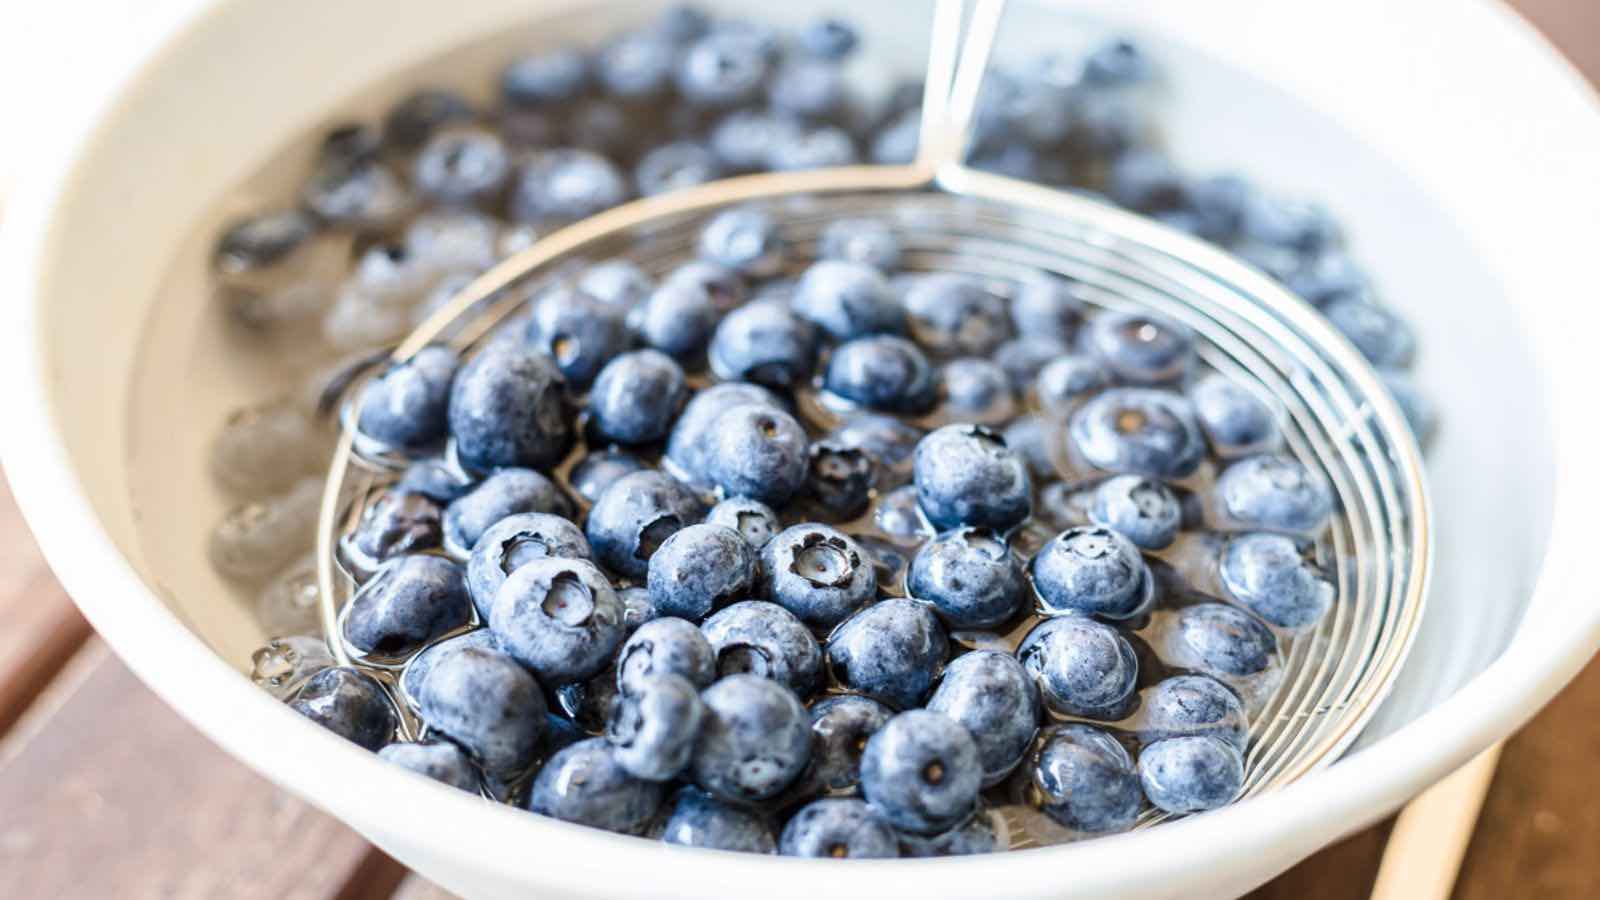 Blueberries in a white bowl on a wooden table.